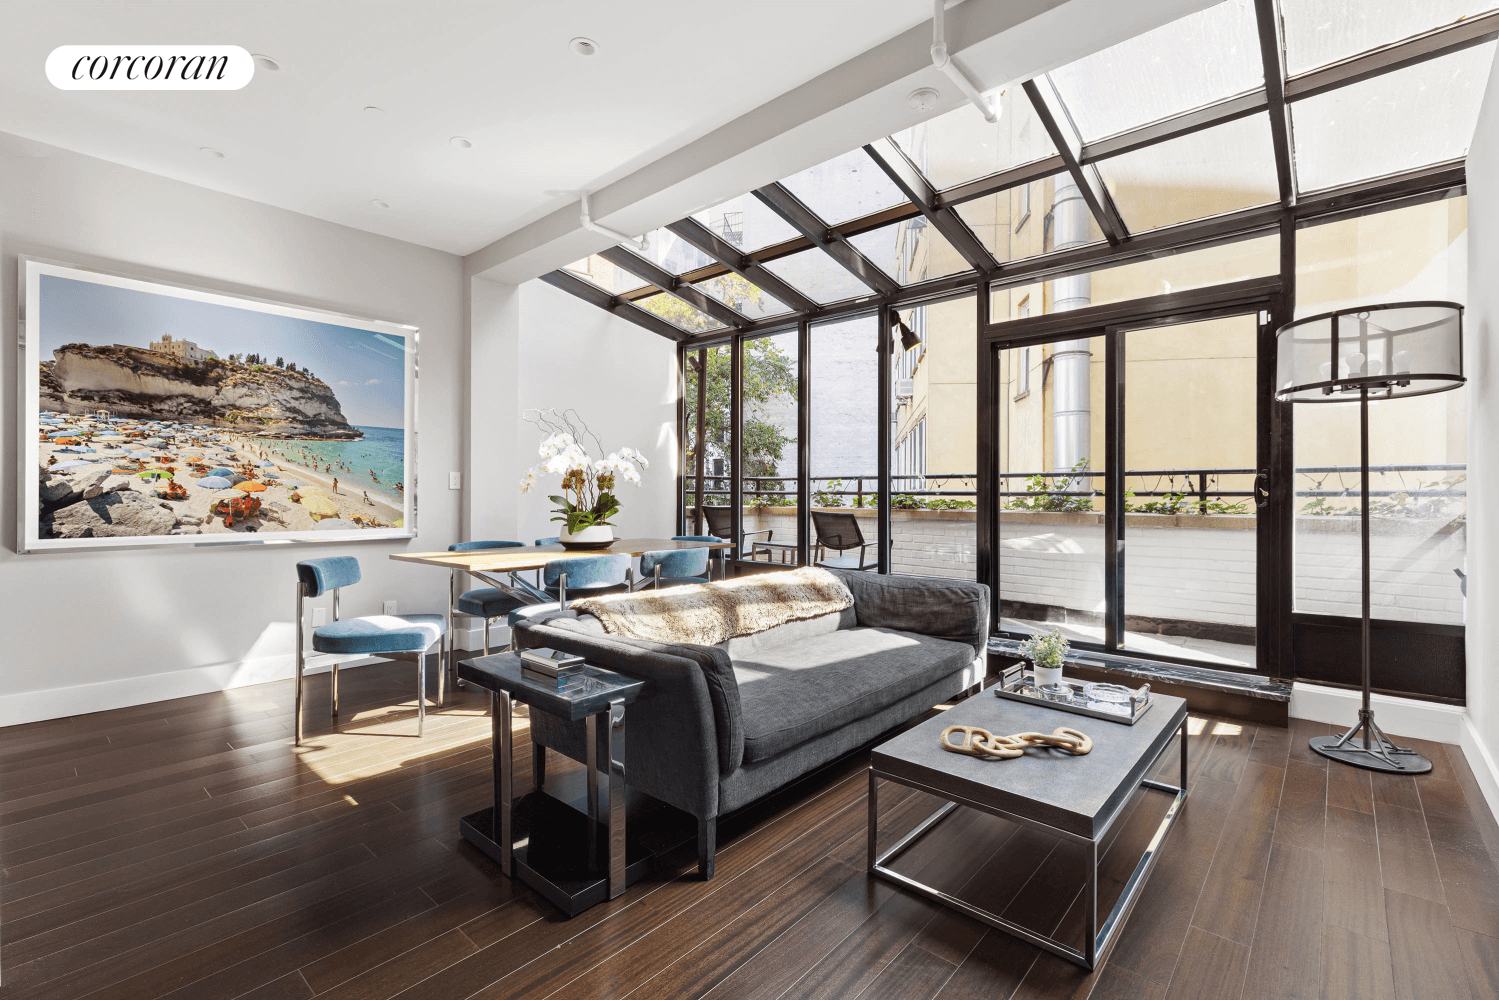 DUPLEX JEWEL BOX WITH OUTDOOR SPACE Beautifully renovated to this designer's exacting standards, this second and third floor condominium duplex with outdoor space is a quiet jewel box in the ...